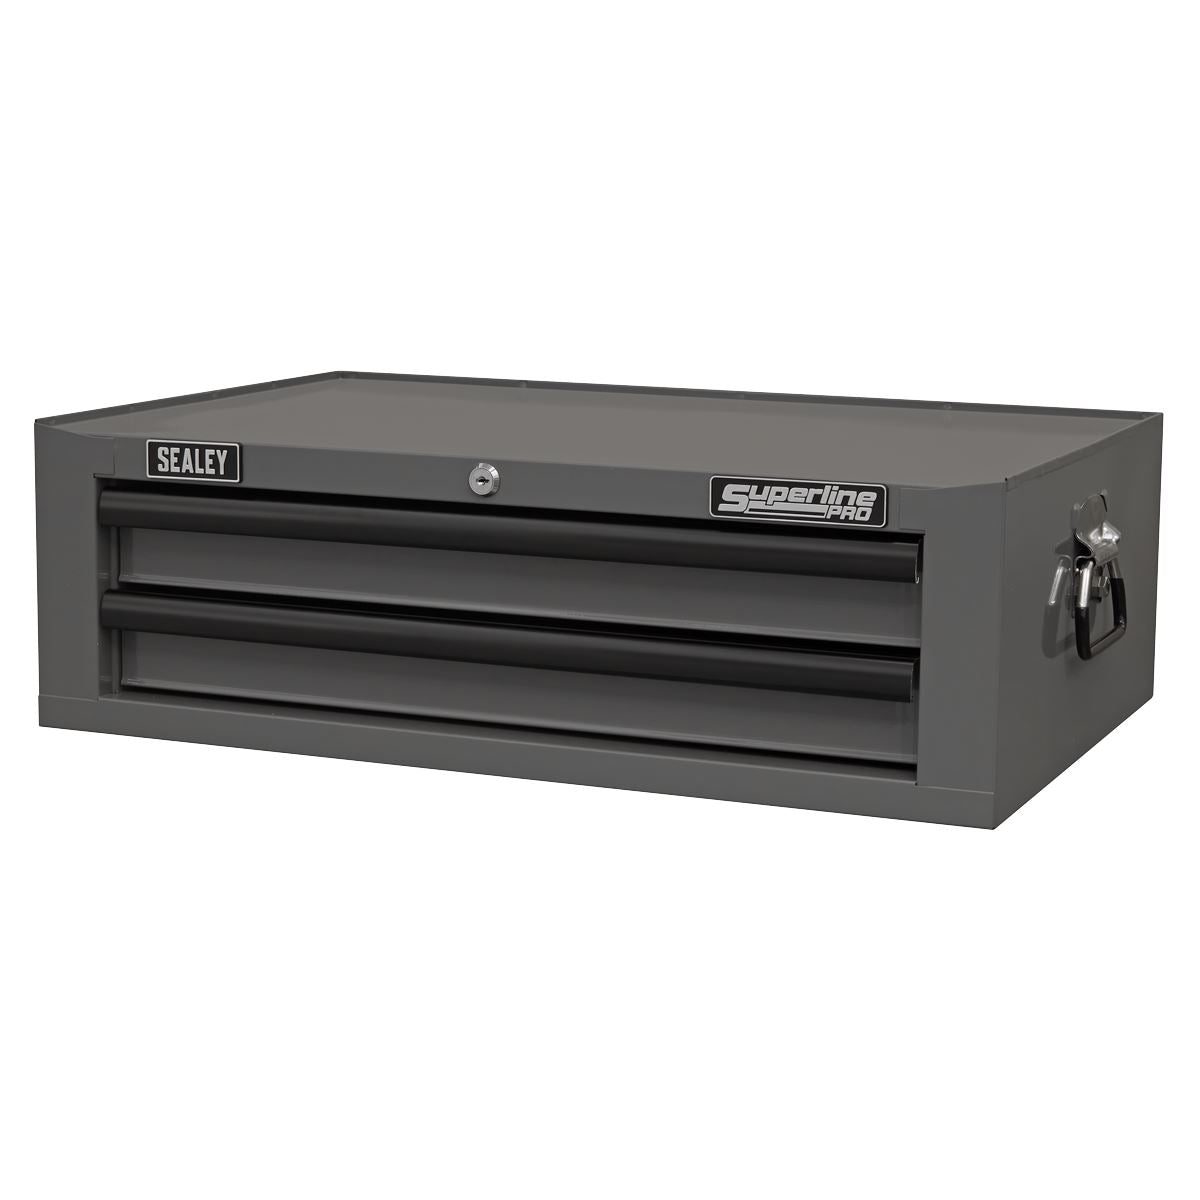 Sealey Superline Pro Mid-Box Tool Chest 2 Drawer with Ball-Bearing Slides - Grey/Black